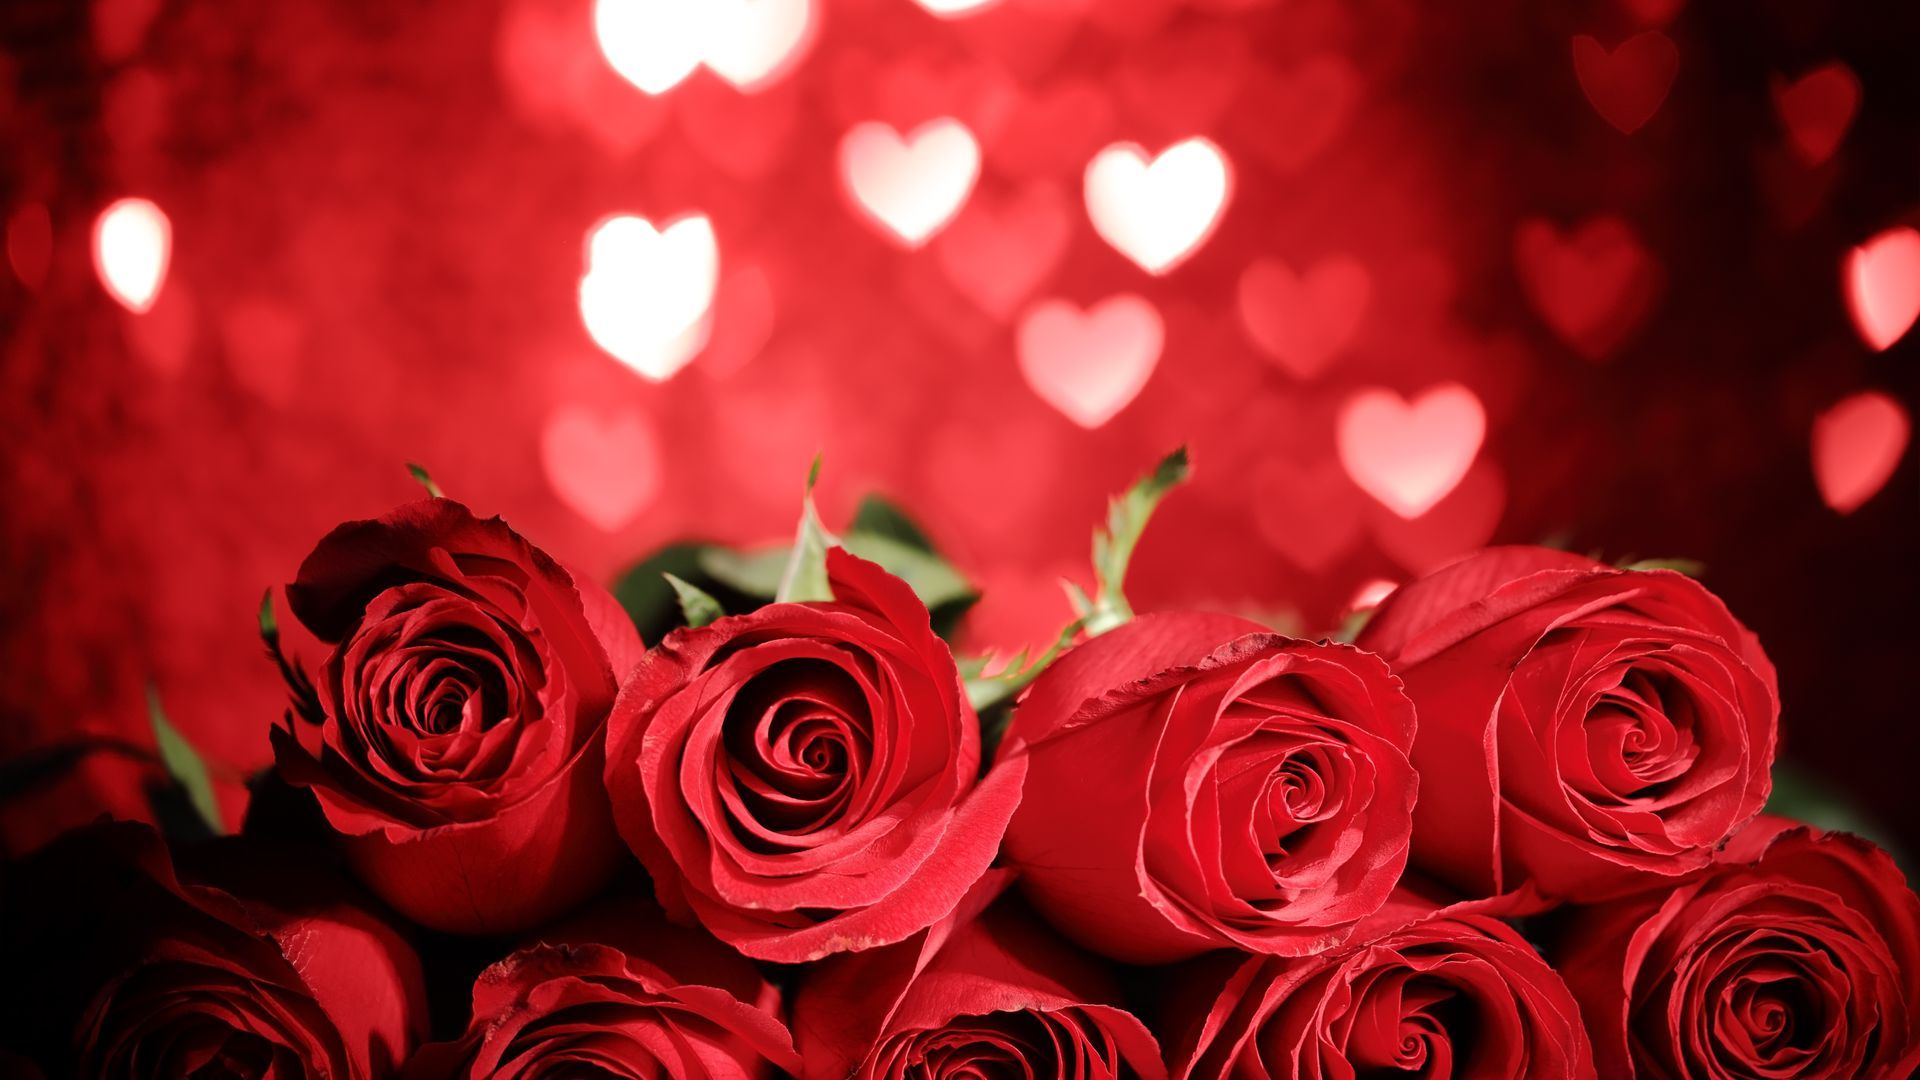 Red Rose With Hearts Free Download Image